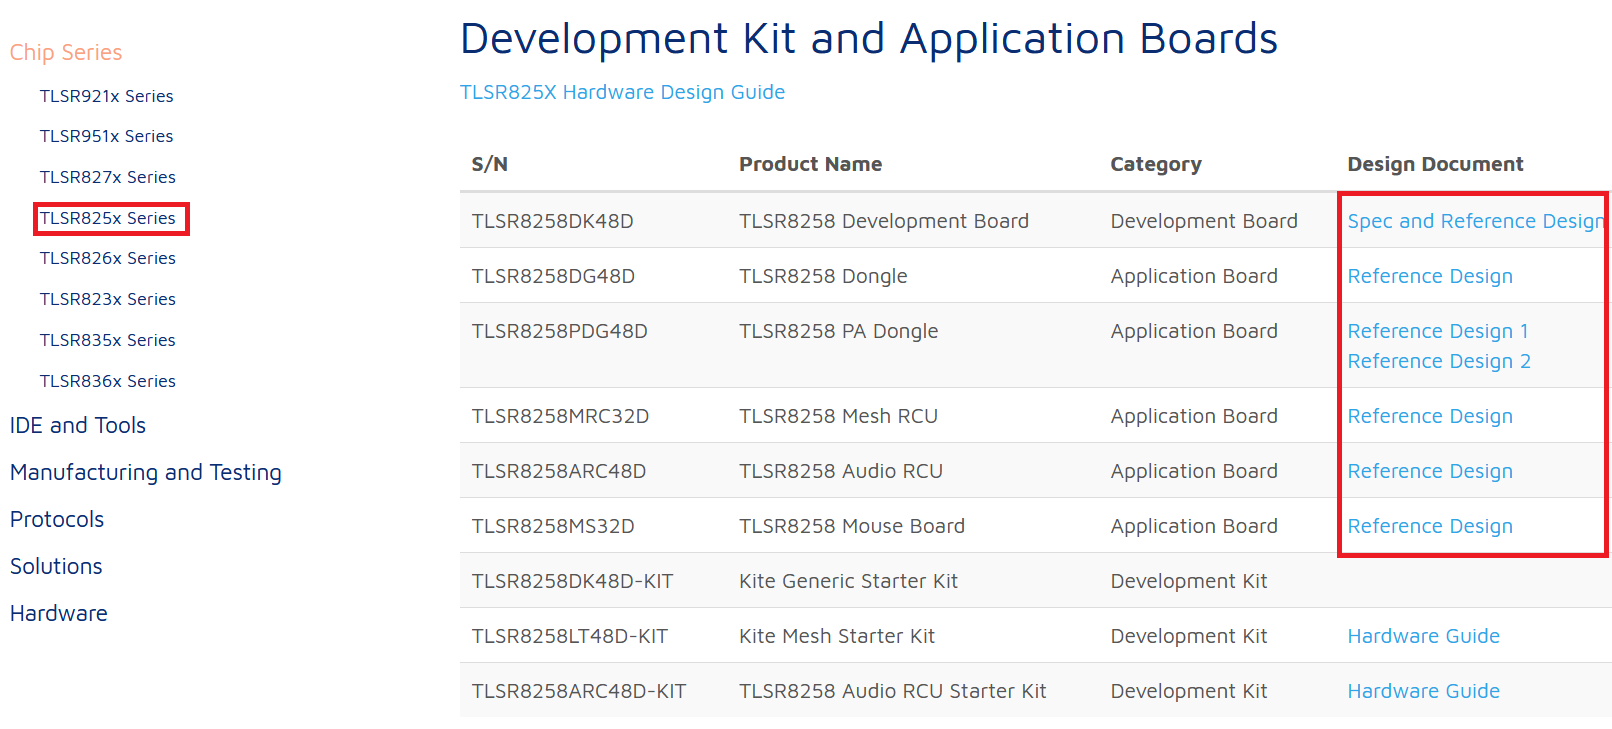 Development Kit and Application Boards